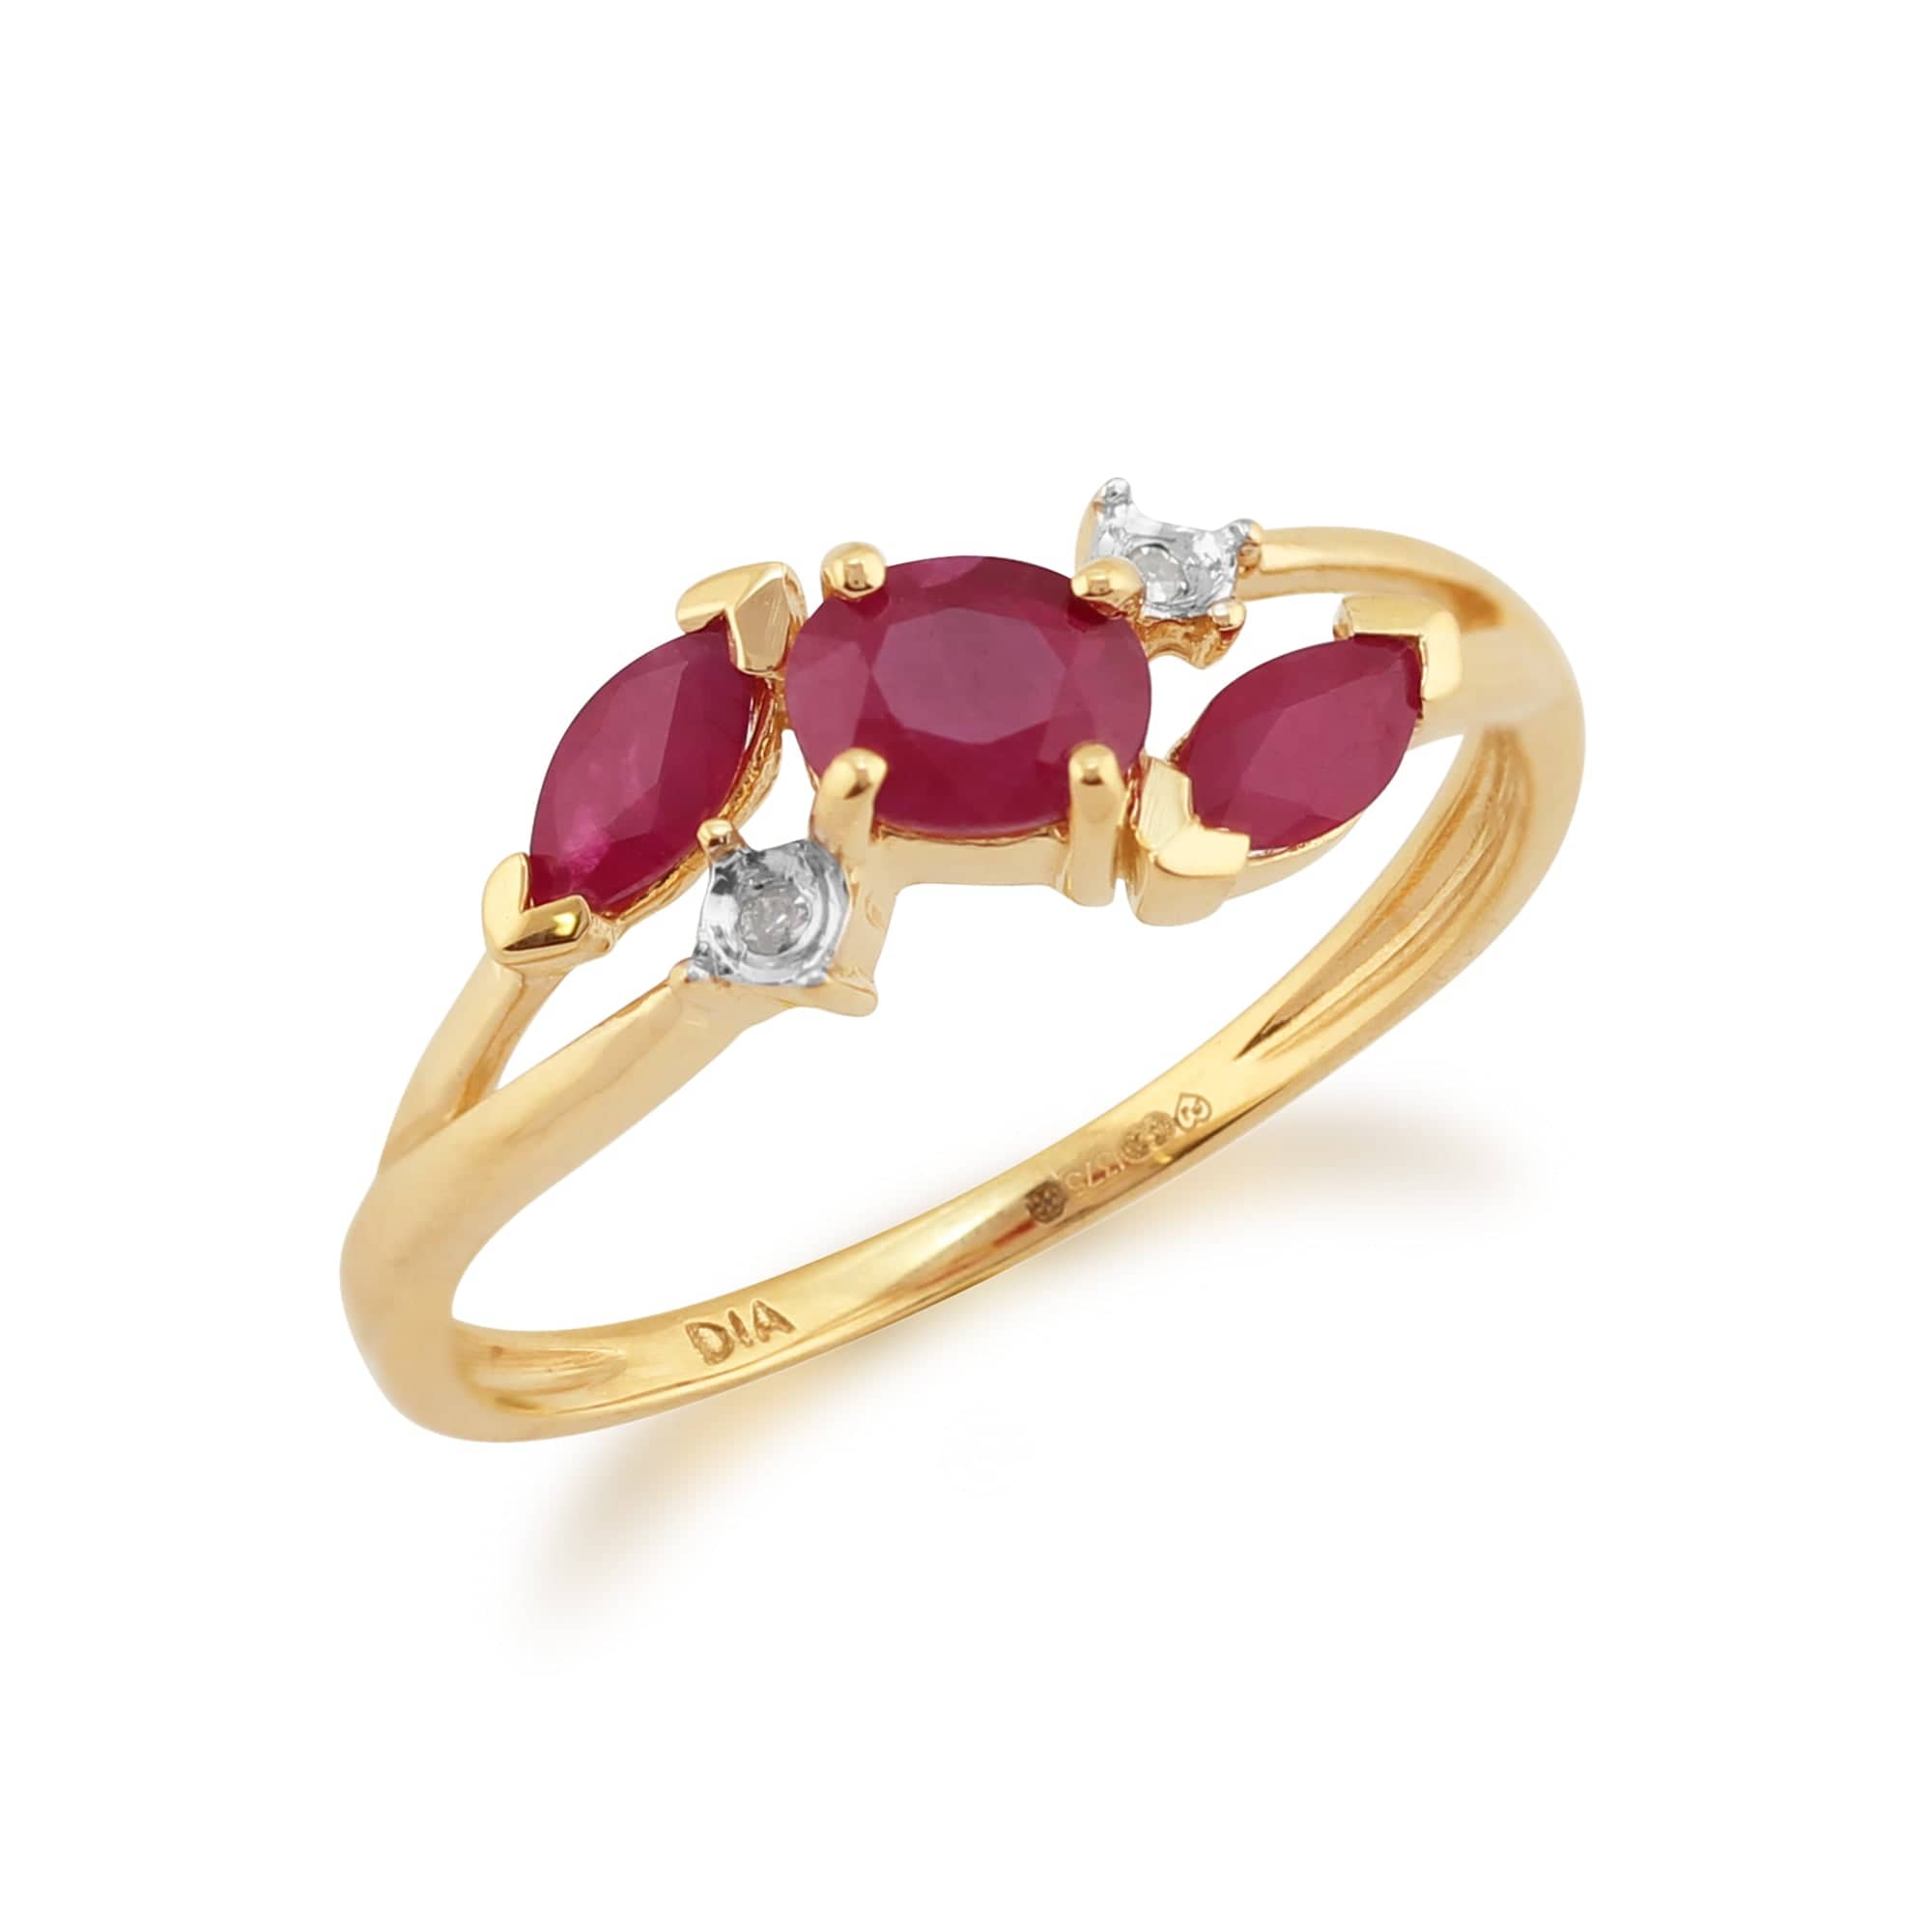 Contemporary Marquise Ruby & Diamond Three Stone Ring in 9ct Yellow Gold